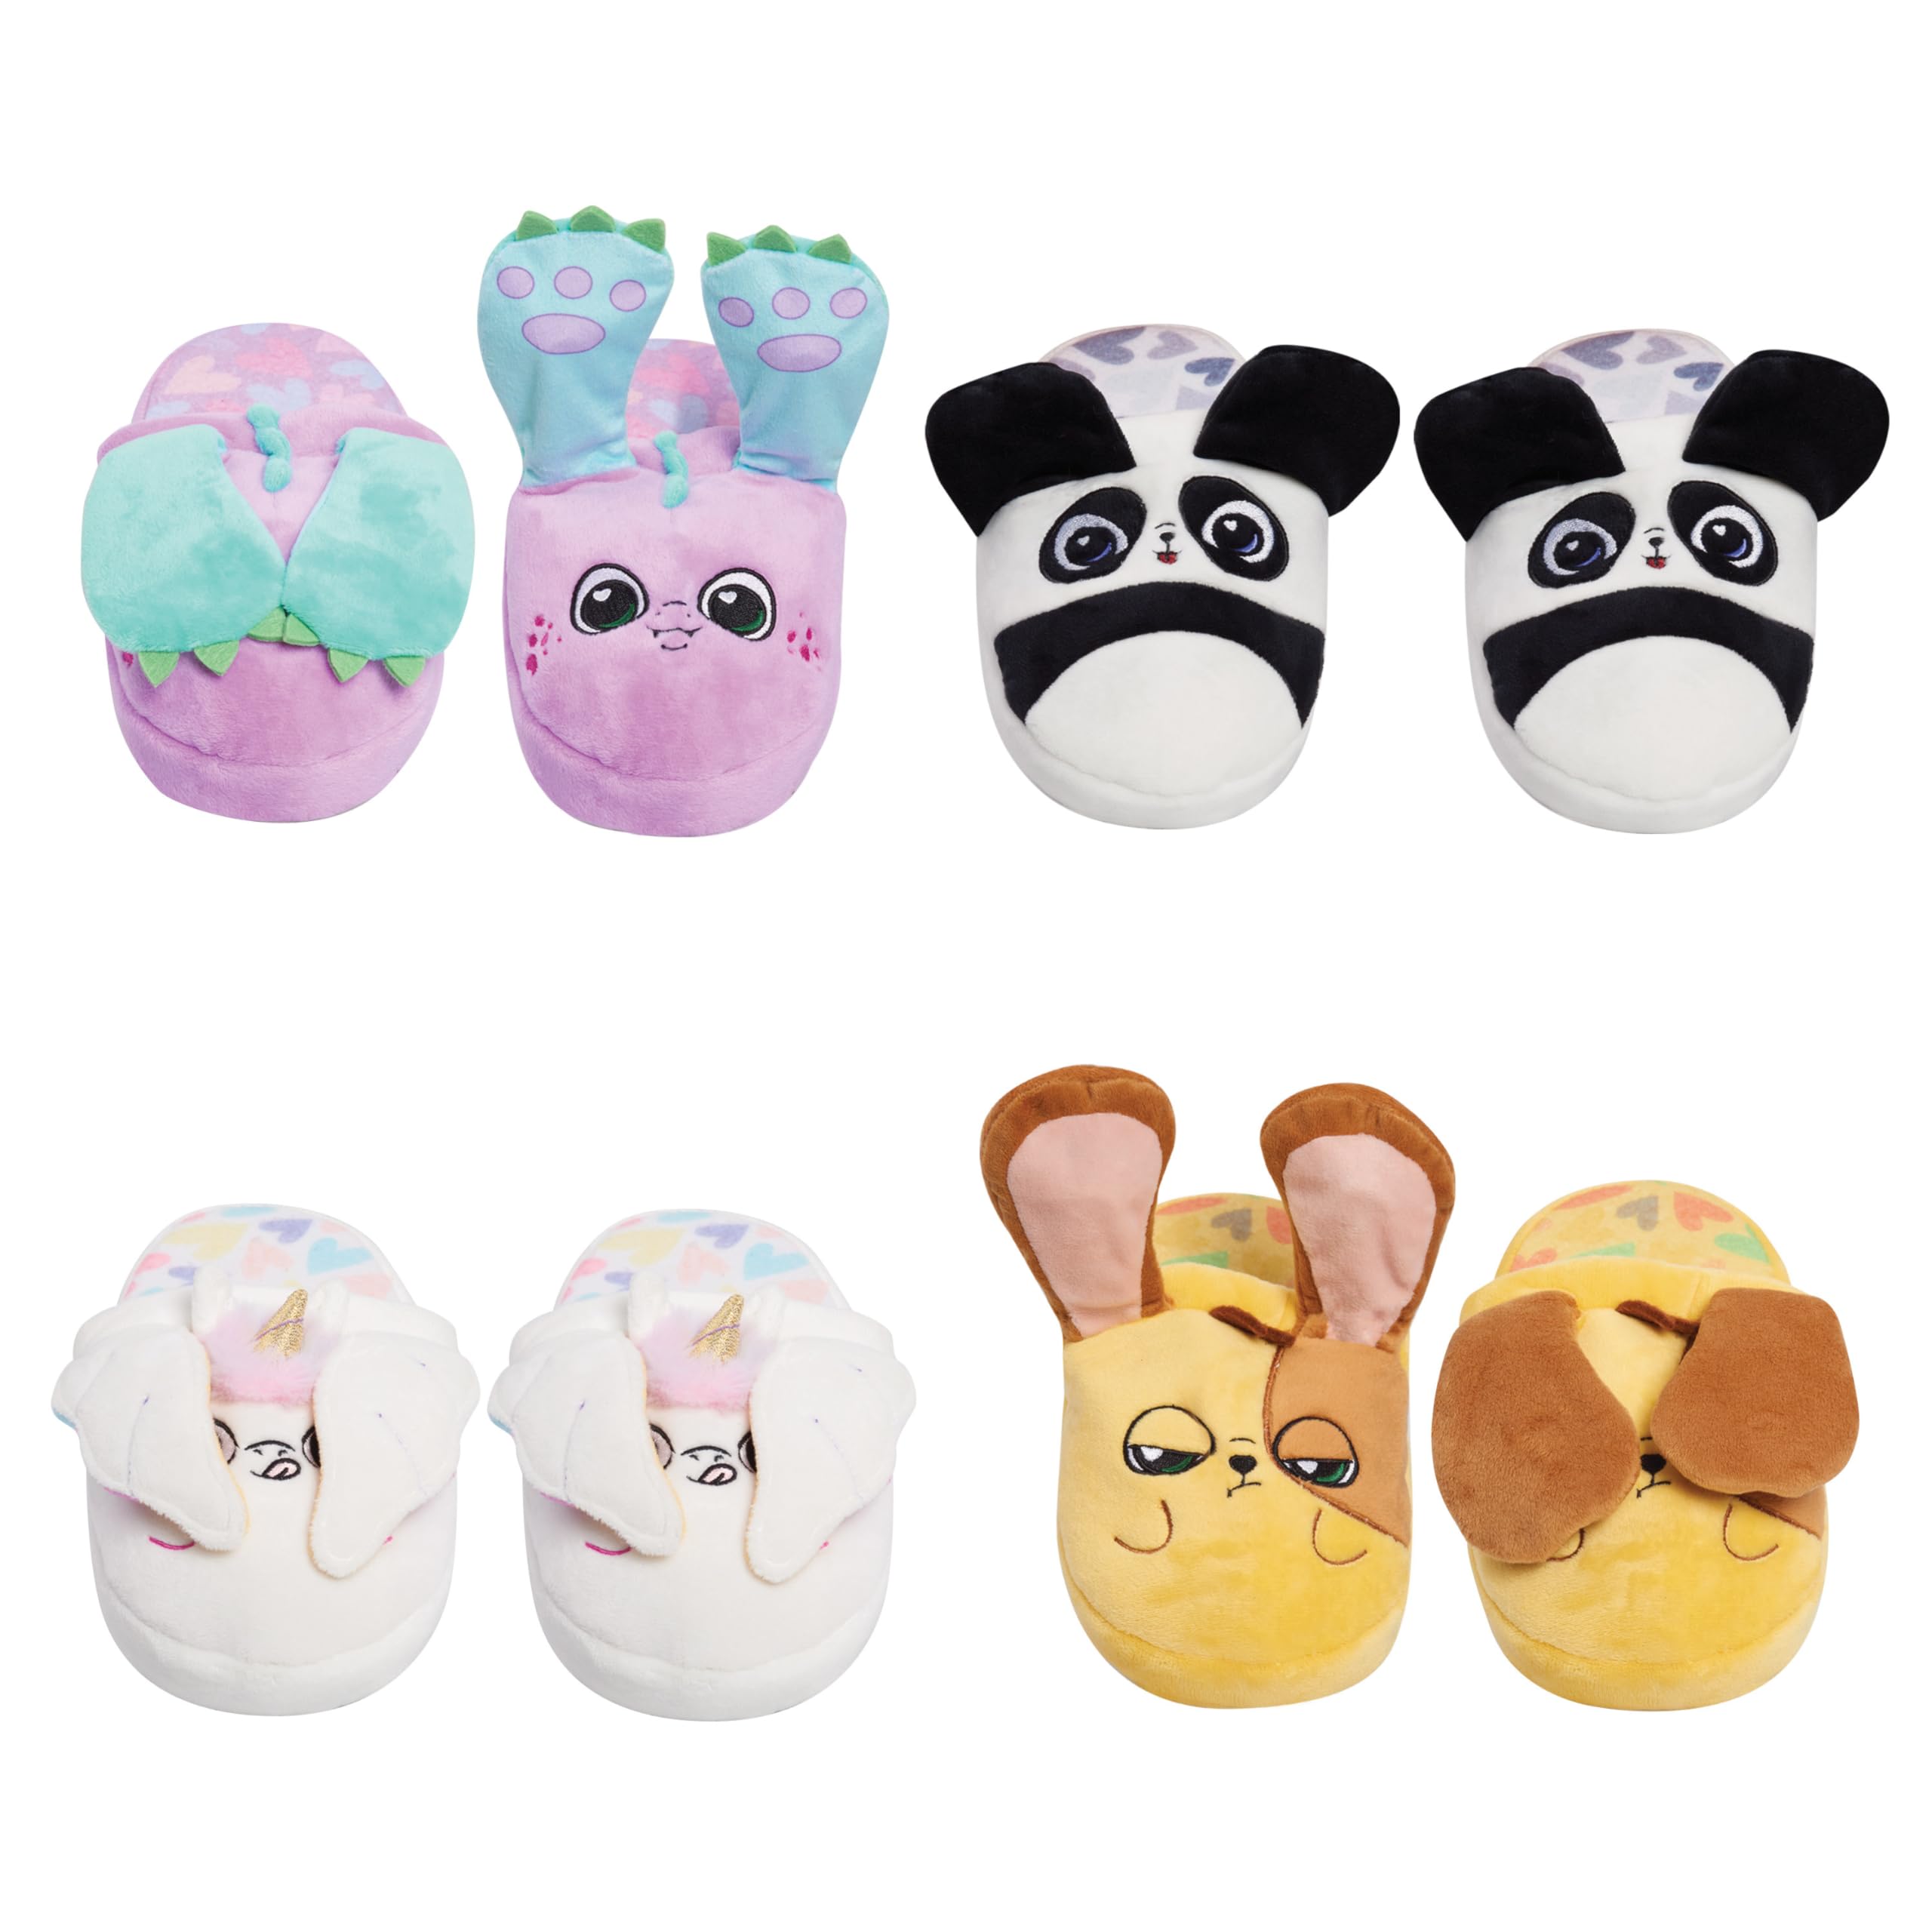 Flipeez Slippers, Puppy, Small, Children Sizes 10-13 (Color May Vary)